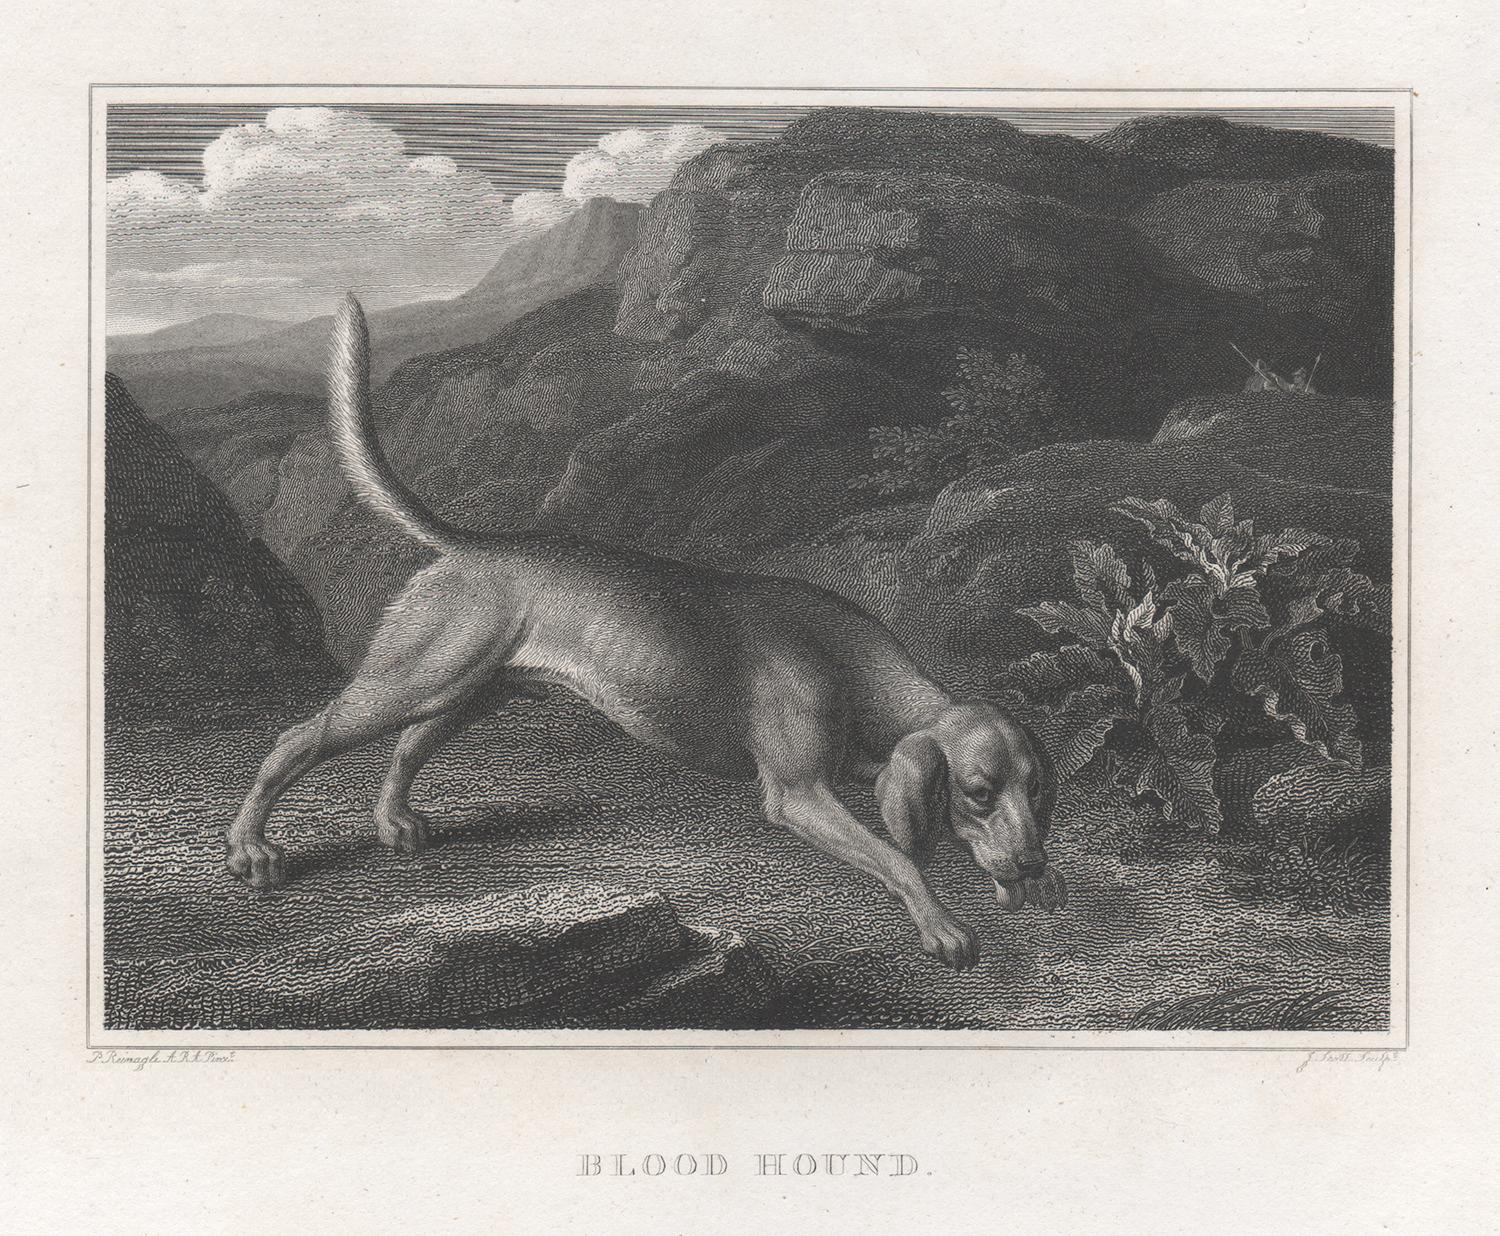 Bloodhound, early 19th century English dog engraving